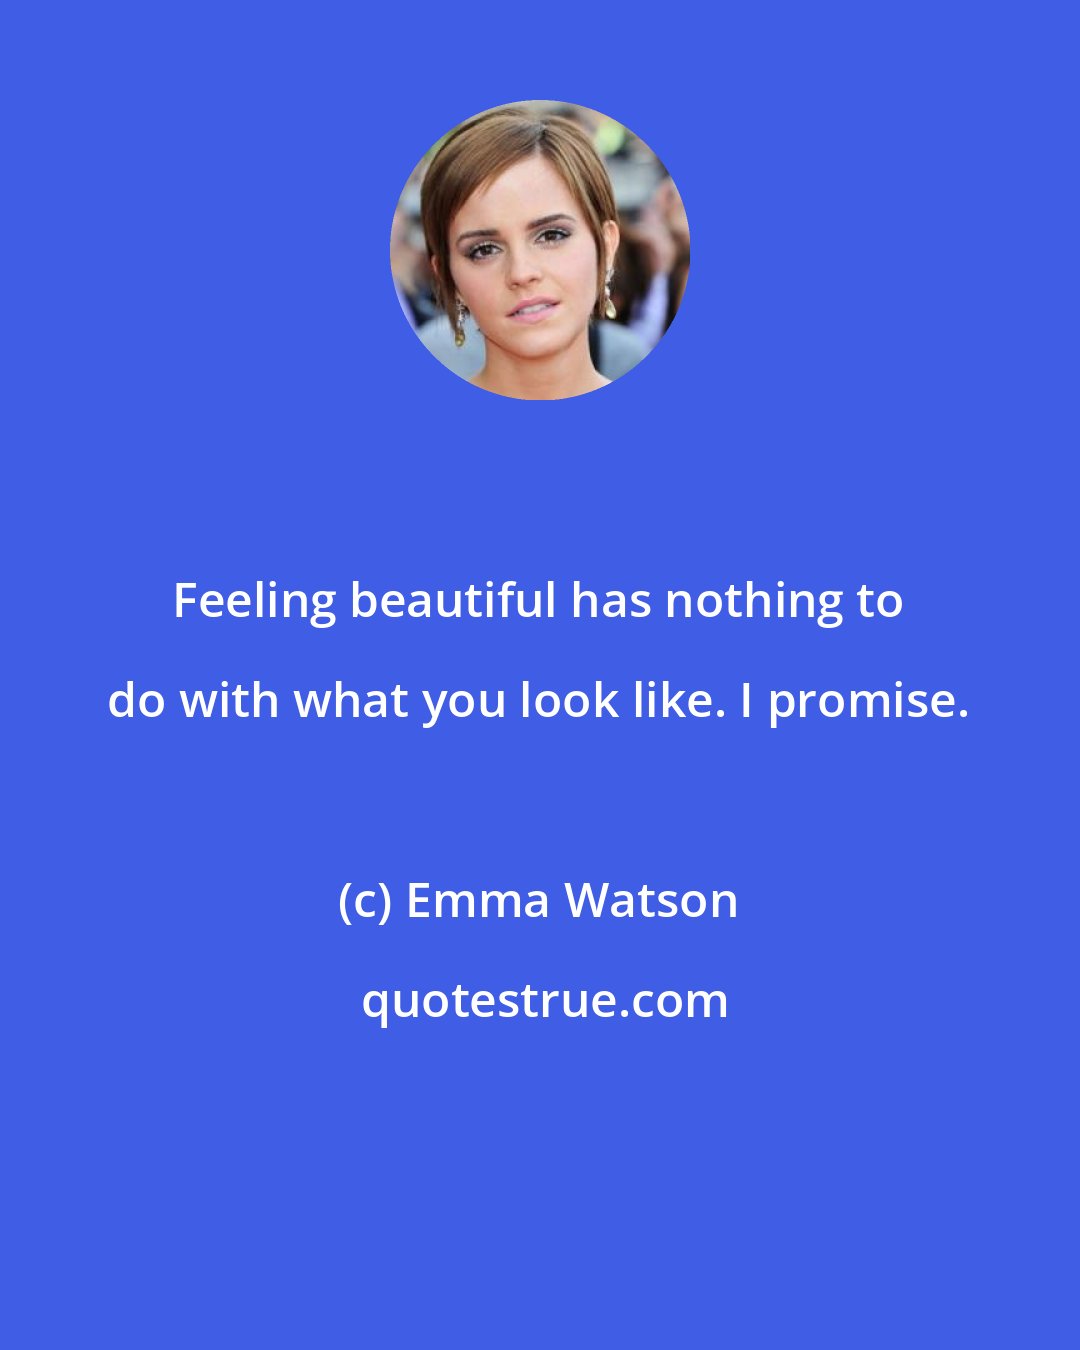 Emma Watson: Feeling beautiful has nothing to do with what you look like. I promise.